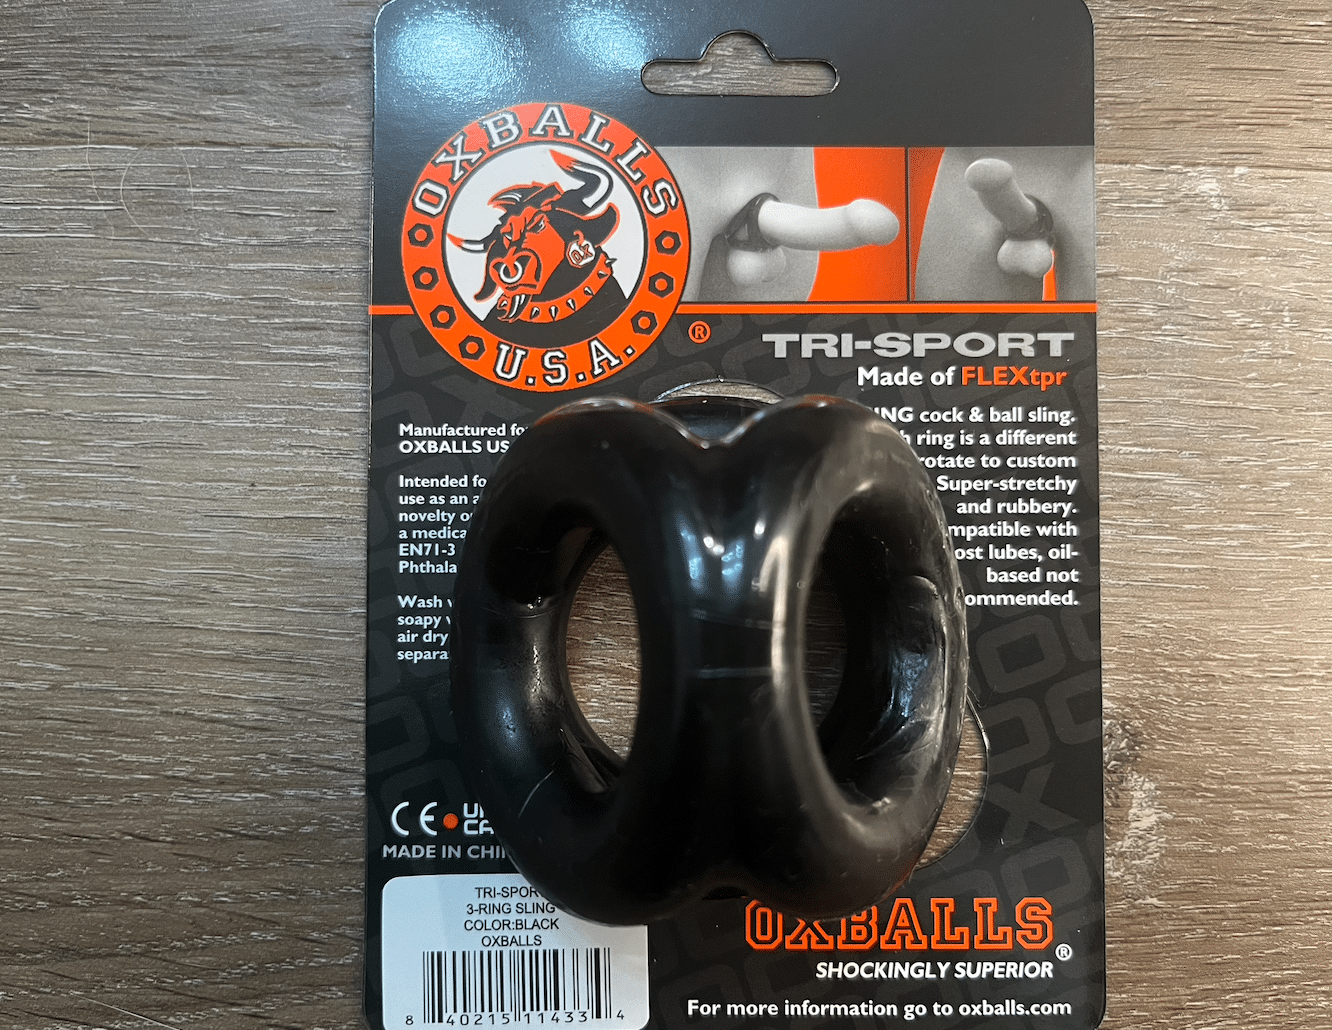 Oxballs Tri-Sport Cock Ring and Ball Sling. Slide 5